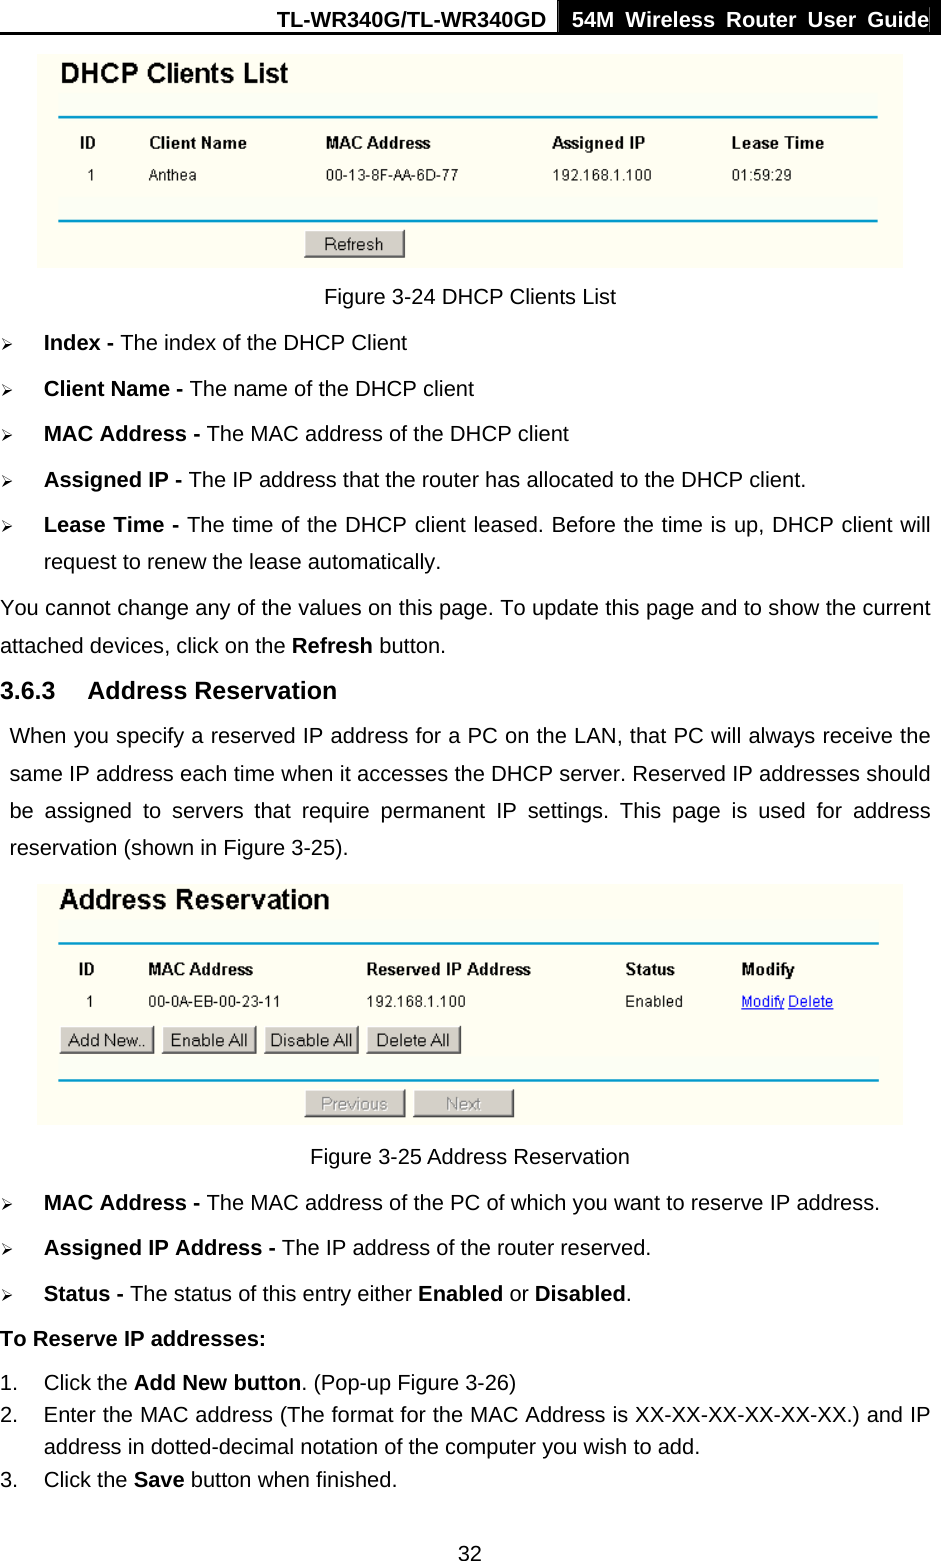 TL-WR340G/TL-WR340GD 54M Wireless Router User Guide  32 Figure 3-24 DHCP Clients List ¾ Index - The index of the DHCP Client   ¾ Client Name - The name of the DHCP client   ¾ MAC Address - The MAC address of the DHCP client   ¾ Assigned IP - The IP address that the router has allocated to the DHCP client. ¾ Lease Time - The time of the DHCP client leased. Before the time is up, DHCP client will request to renew the lease automatically. You cannot change any of the values on this page. To update this page and to show the current attached devices, click on the Refresh button. 3.6.3 Address Reservation When you specify a reserved IP address for a PC on the LAN, that PC will always receive the same IP address each time when it accesses the DHCP server. Reserved IP addresses should be assigned to servers that require permanent IP settings. This page is used for address reservation (shown in Figure 3-25).  Figure 3-25 Address Reservation ¾ MAC Address - The MAC address of the PC of which you want to reserve IP address. ¾ Assigned IP Address - The IP address of the router reserved. ¾ Status - The status of this entry either Enabled or Disabled. To Reserve IP addresses:  1. Click the Add New button. (Pop-up Figure 3-26) 2.  Enter the MAC address (The format for the MAC Address is XX-XX-XX-XX-XX-XX.) and IP address in dotted-decimal notation of the computer you wish to add.   3. Click the Save button when finished.   